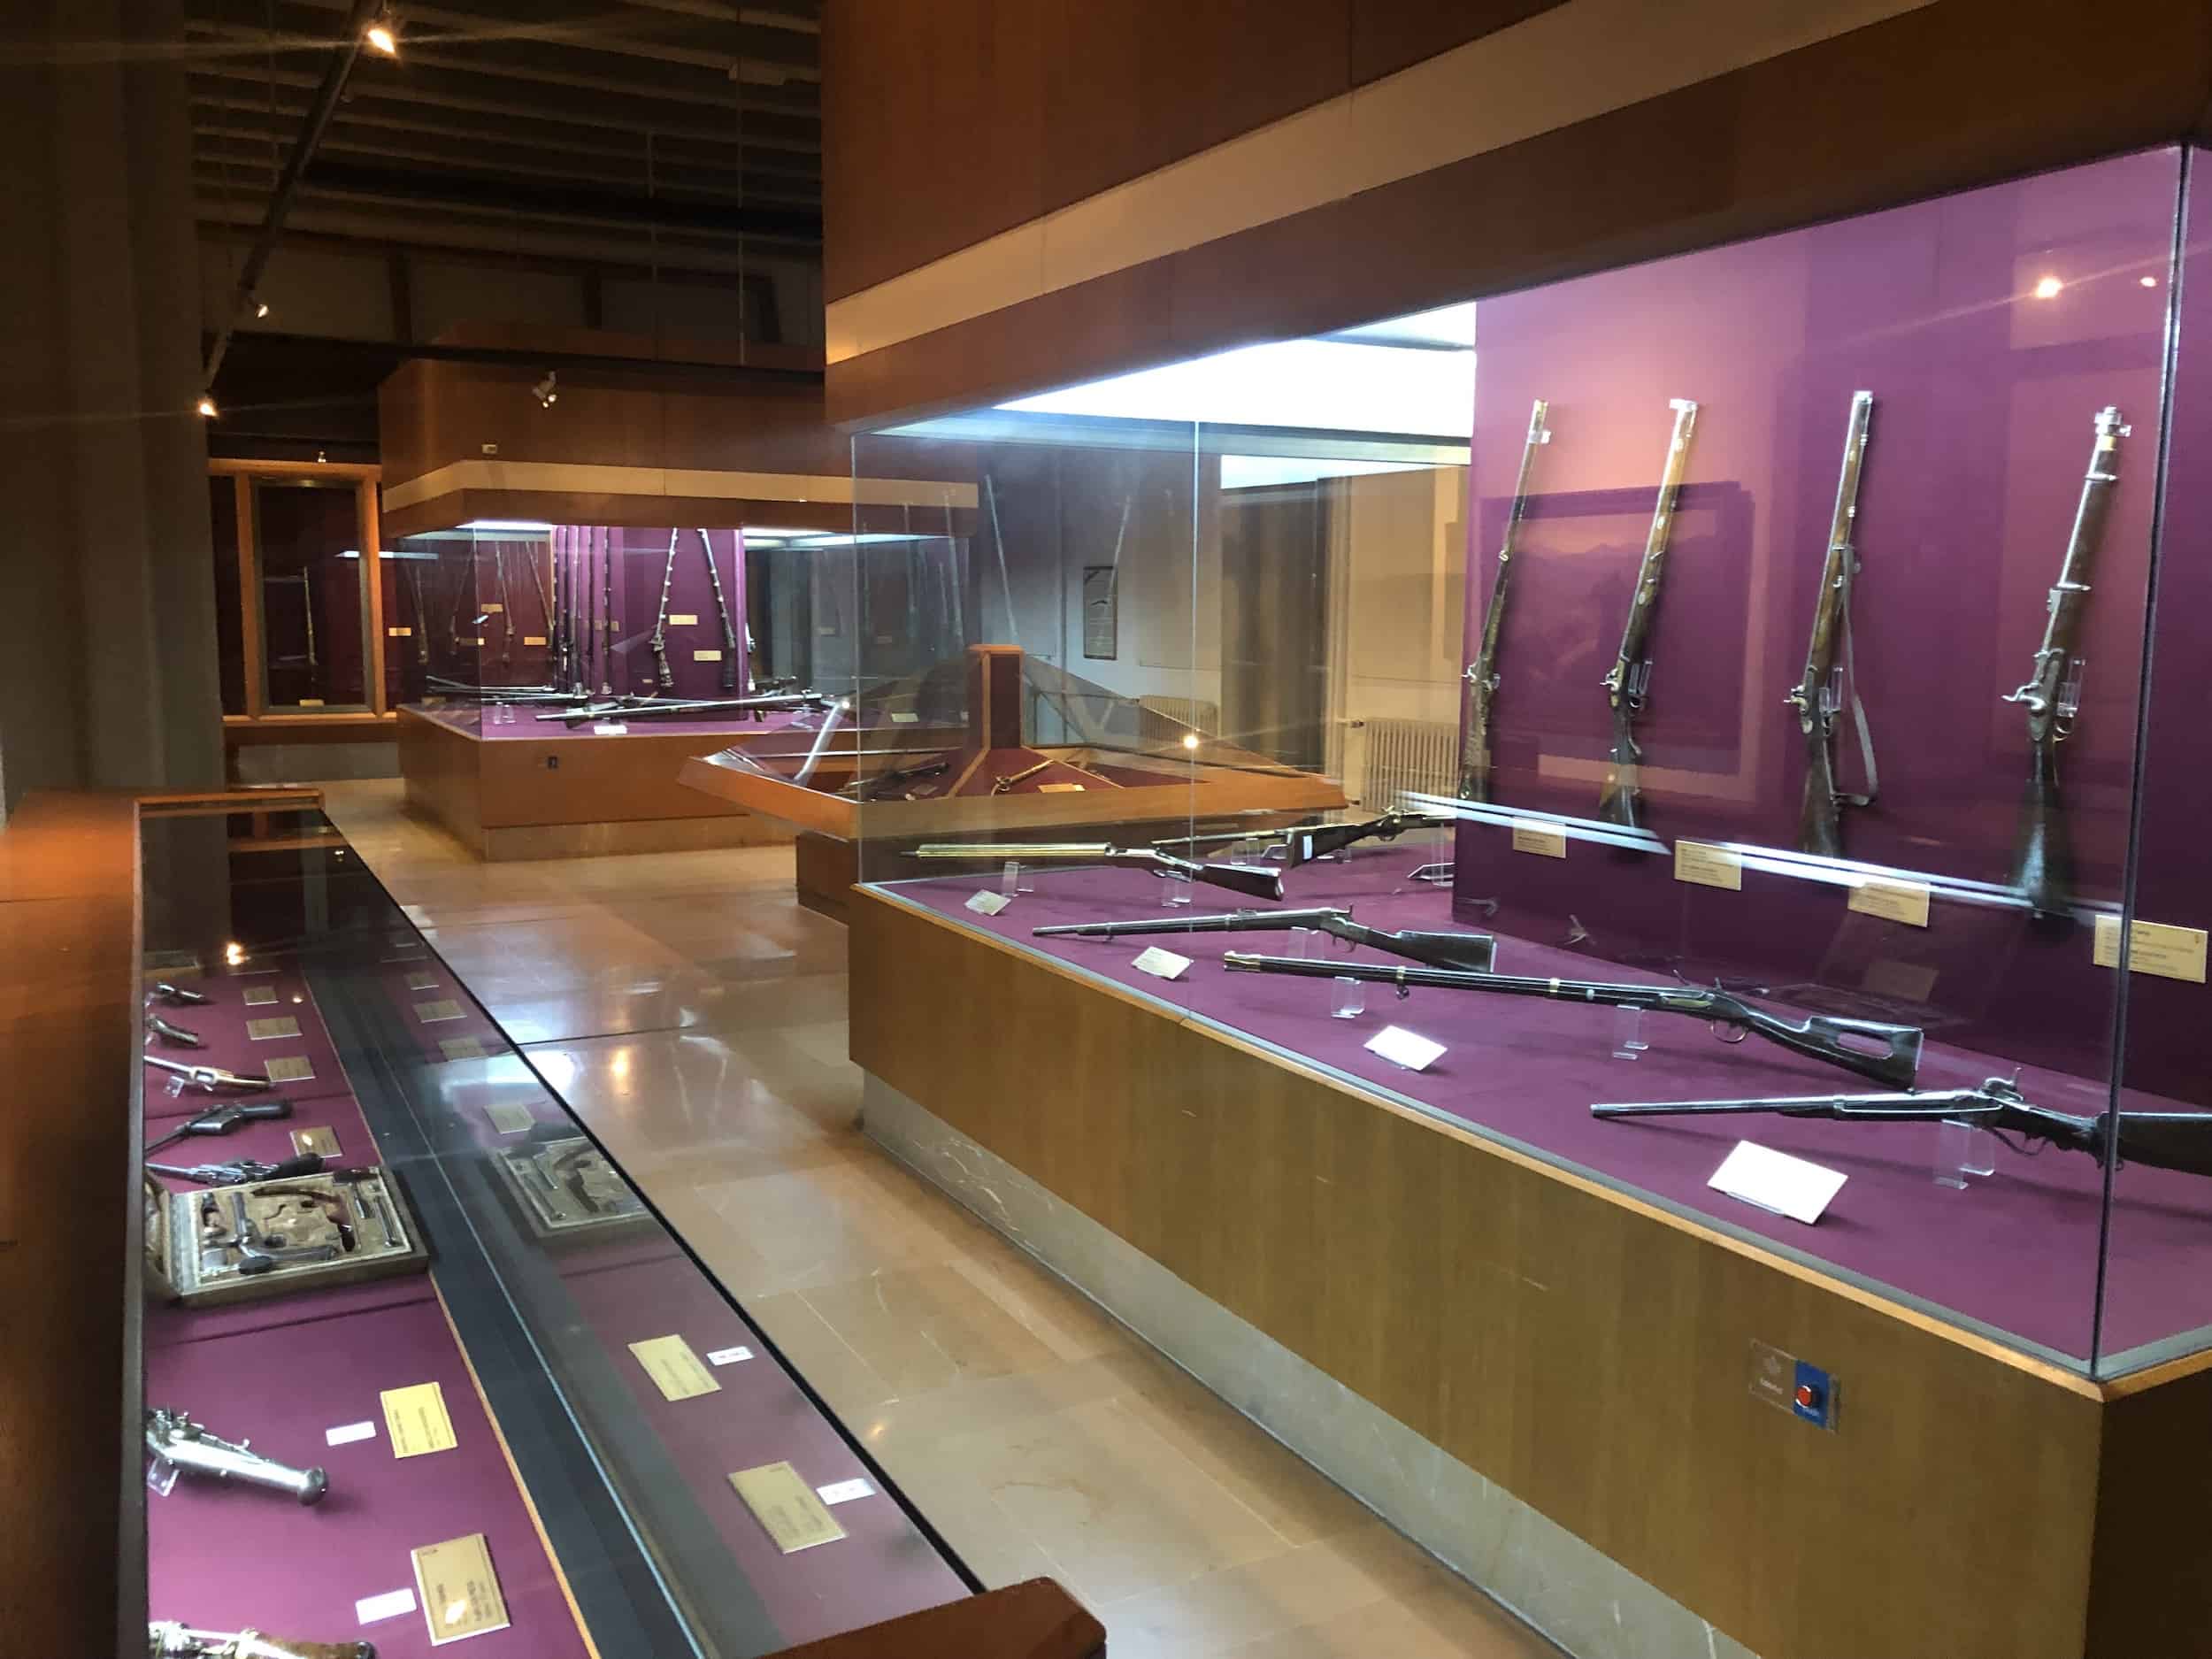 Firearms Hall 2 at the Harbiye Military Museum in Istanbul, Turkey